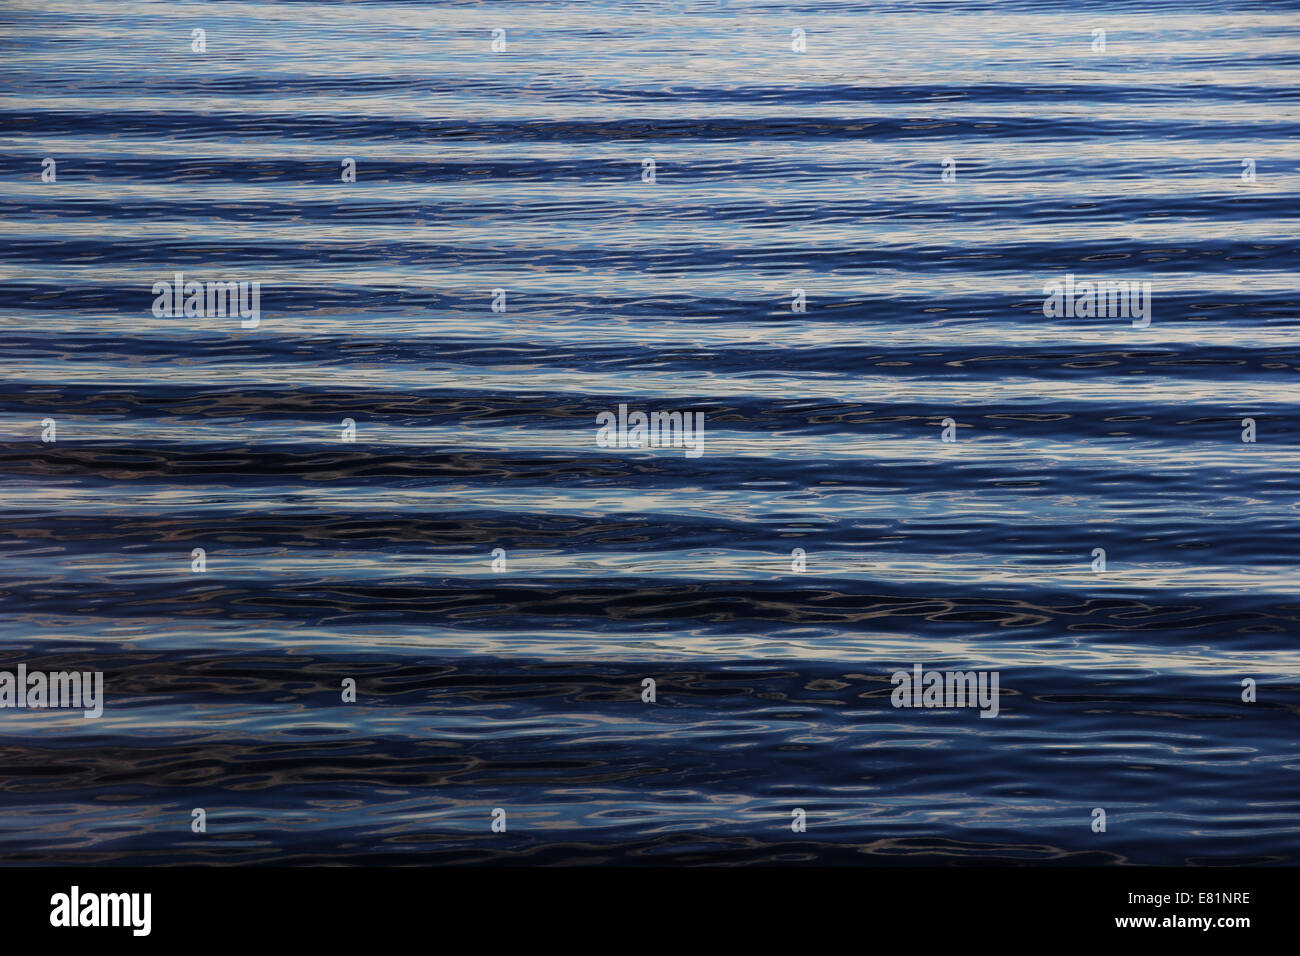 Uniform water waves, reflection, with side waves, Lake Constance, Germany Stock Photo